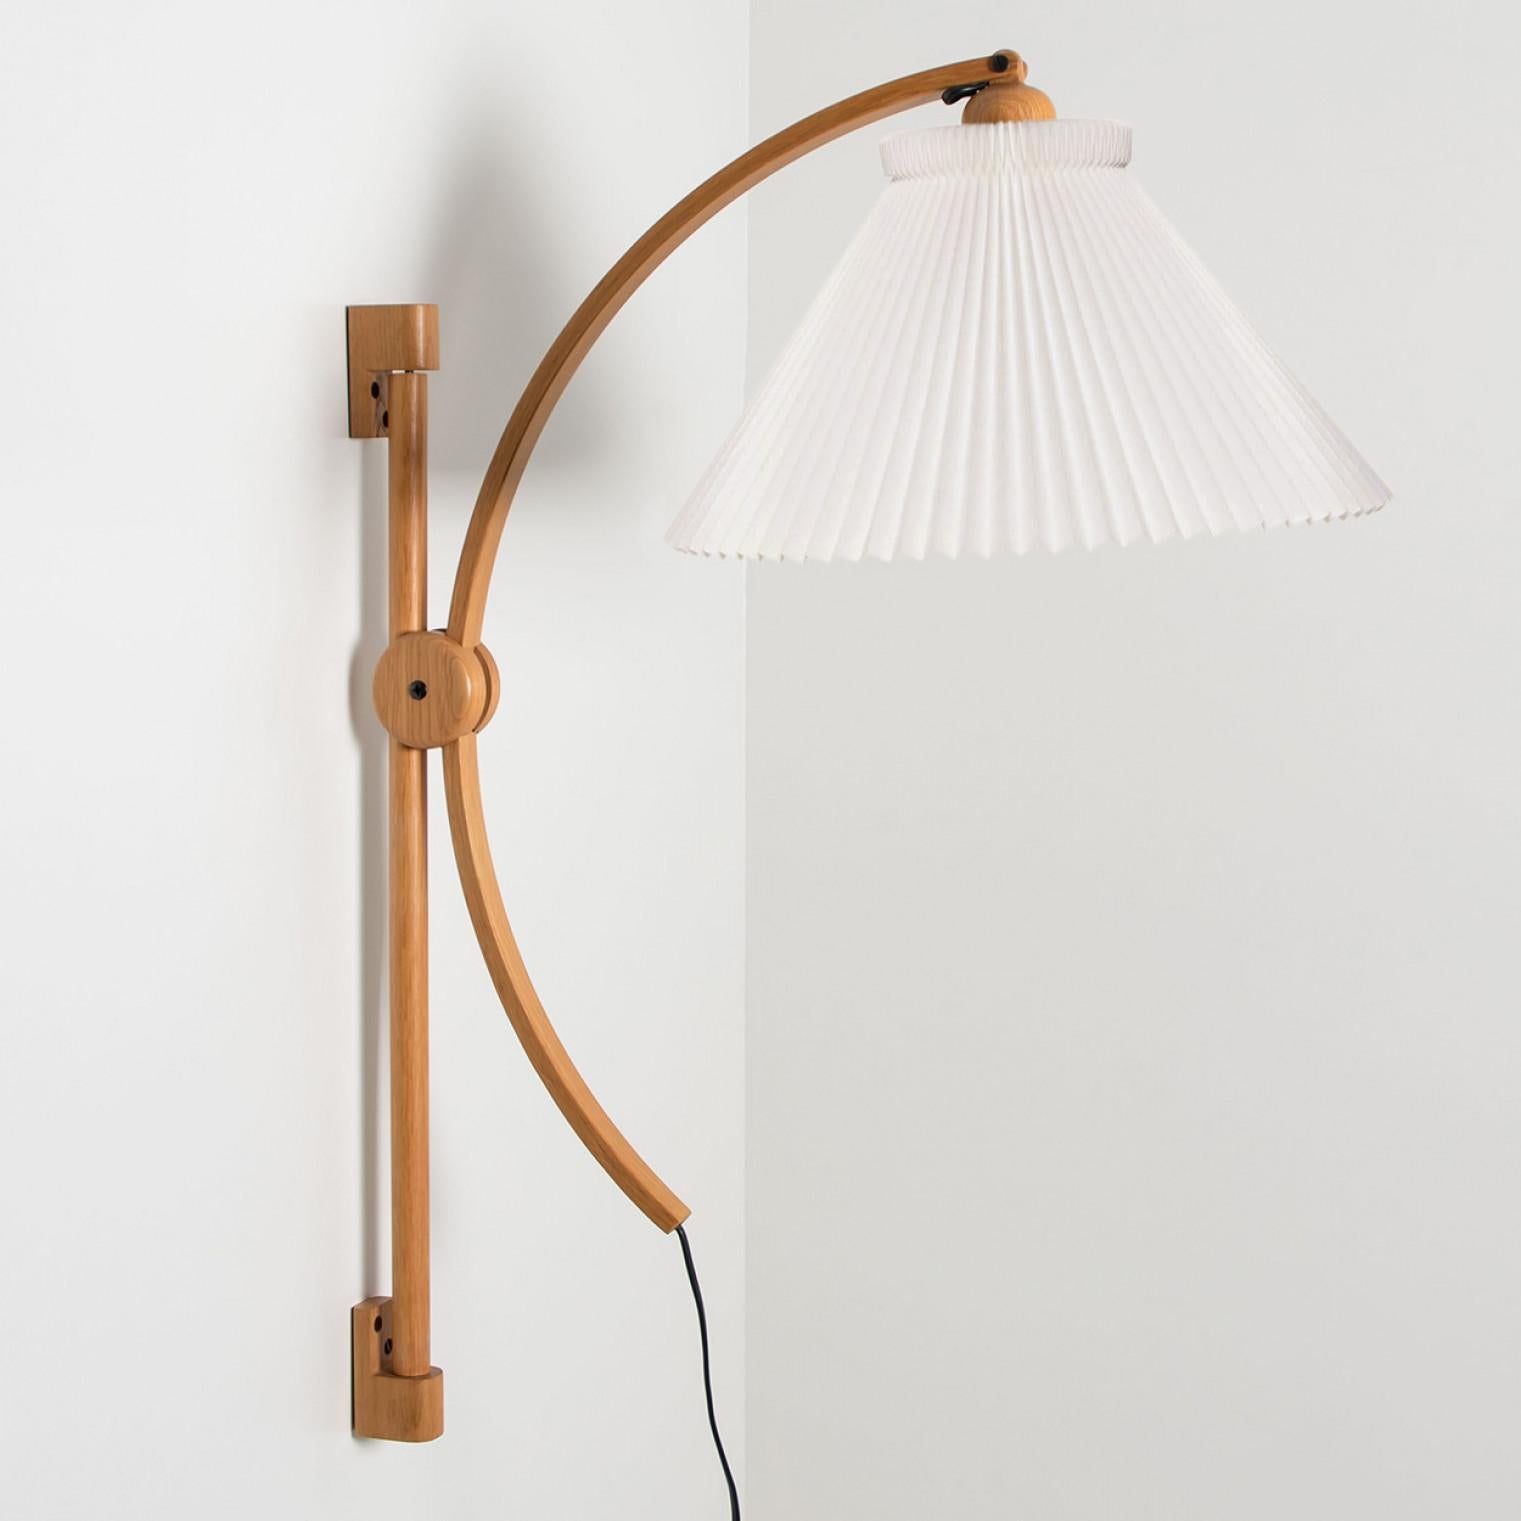 Pair of wonderful oak wall lights with new lampshade by Le Klint. The light is manufactured by Domus in the 1970s in Germany, Europe.
The oak base is adjustable in height. The beautiful, folded lampshade diffuses a warm light.

